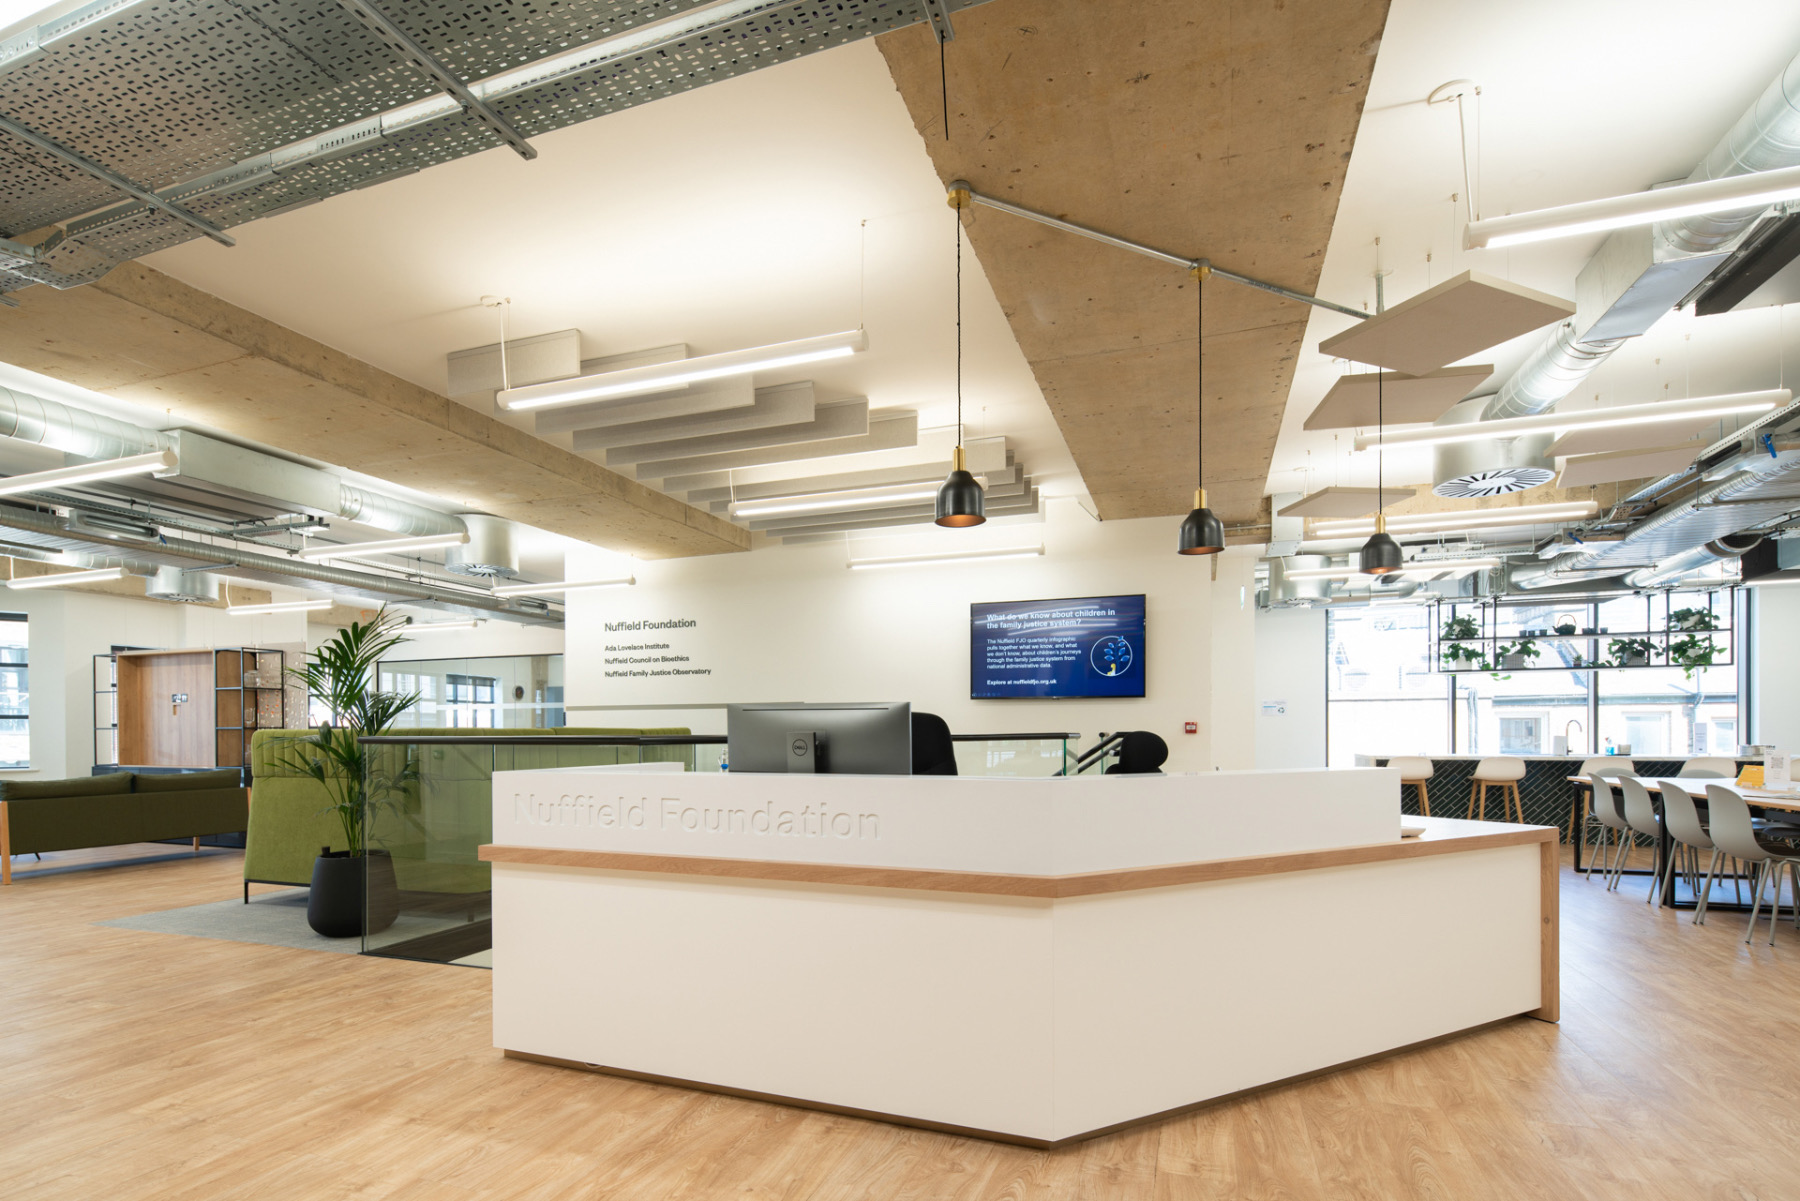 A Look Inside Nuffield Foundation’s New London Office